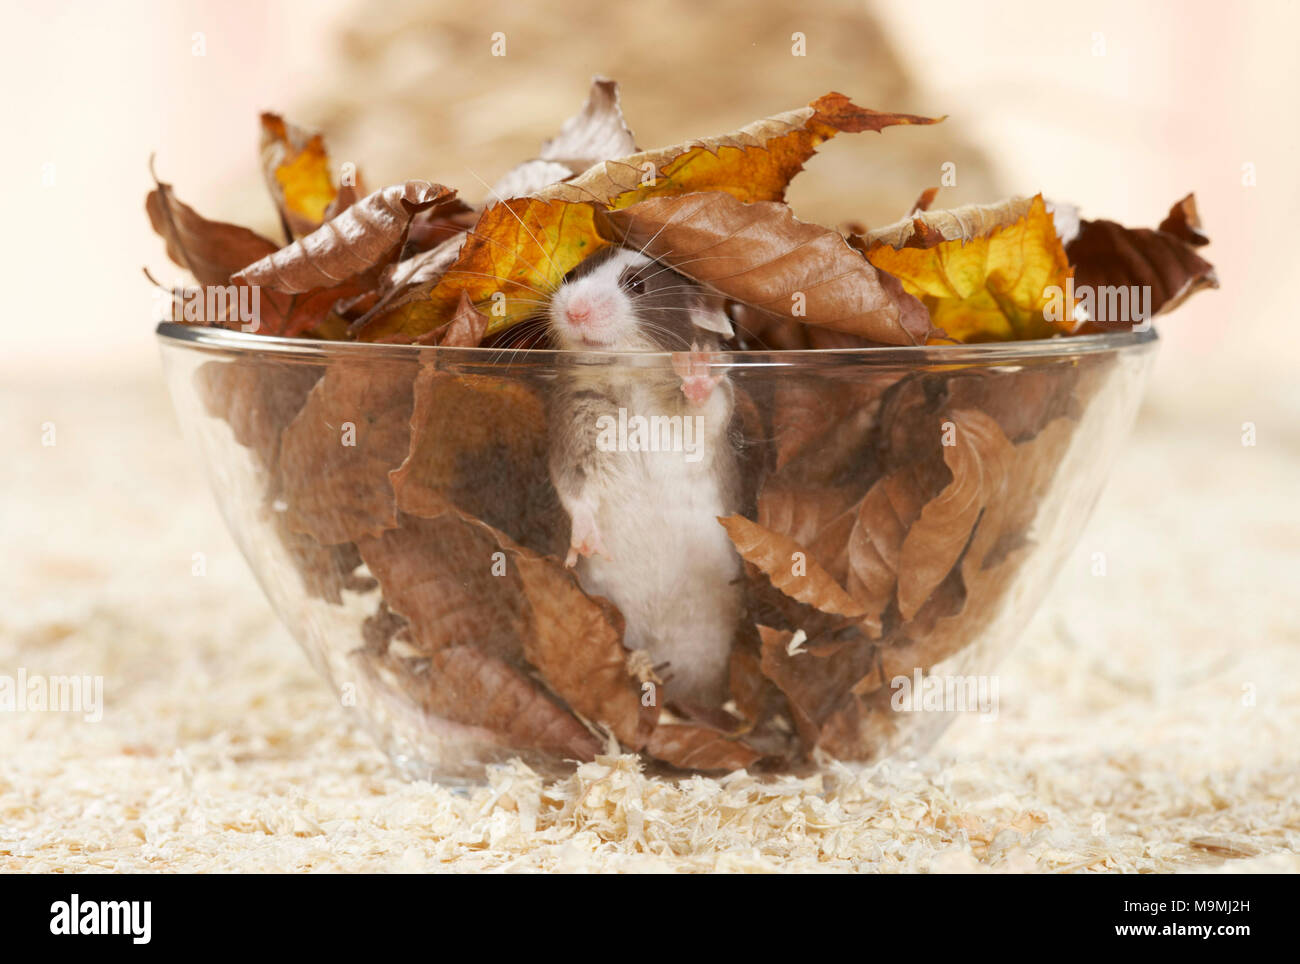 Fancy Mouse playing in a bowl, filled with leaf litter. Germany.. Stock Photo